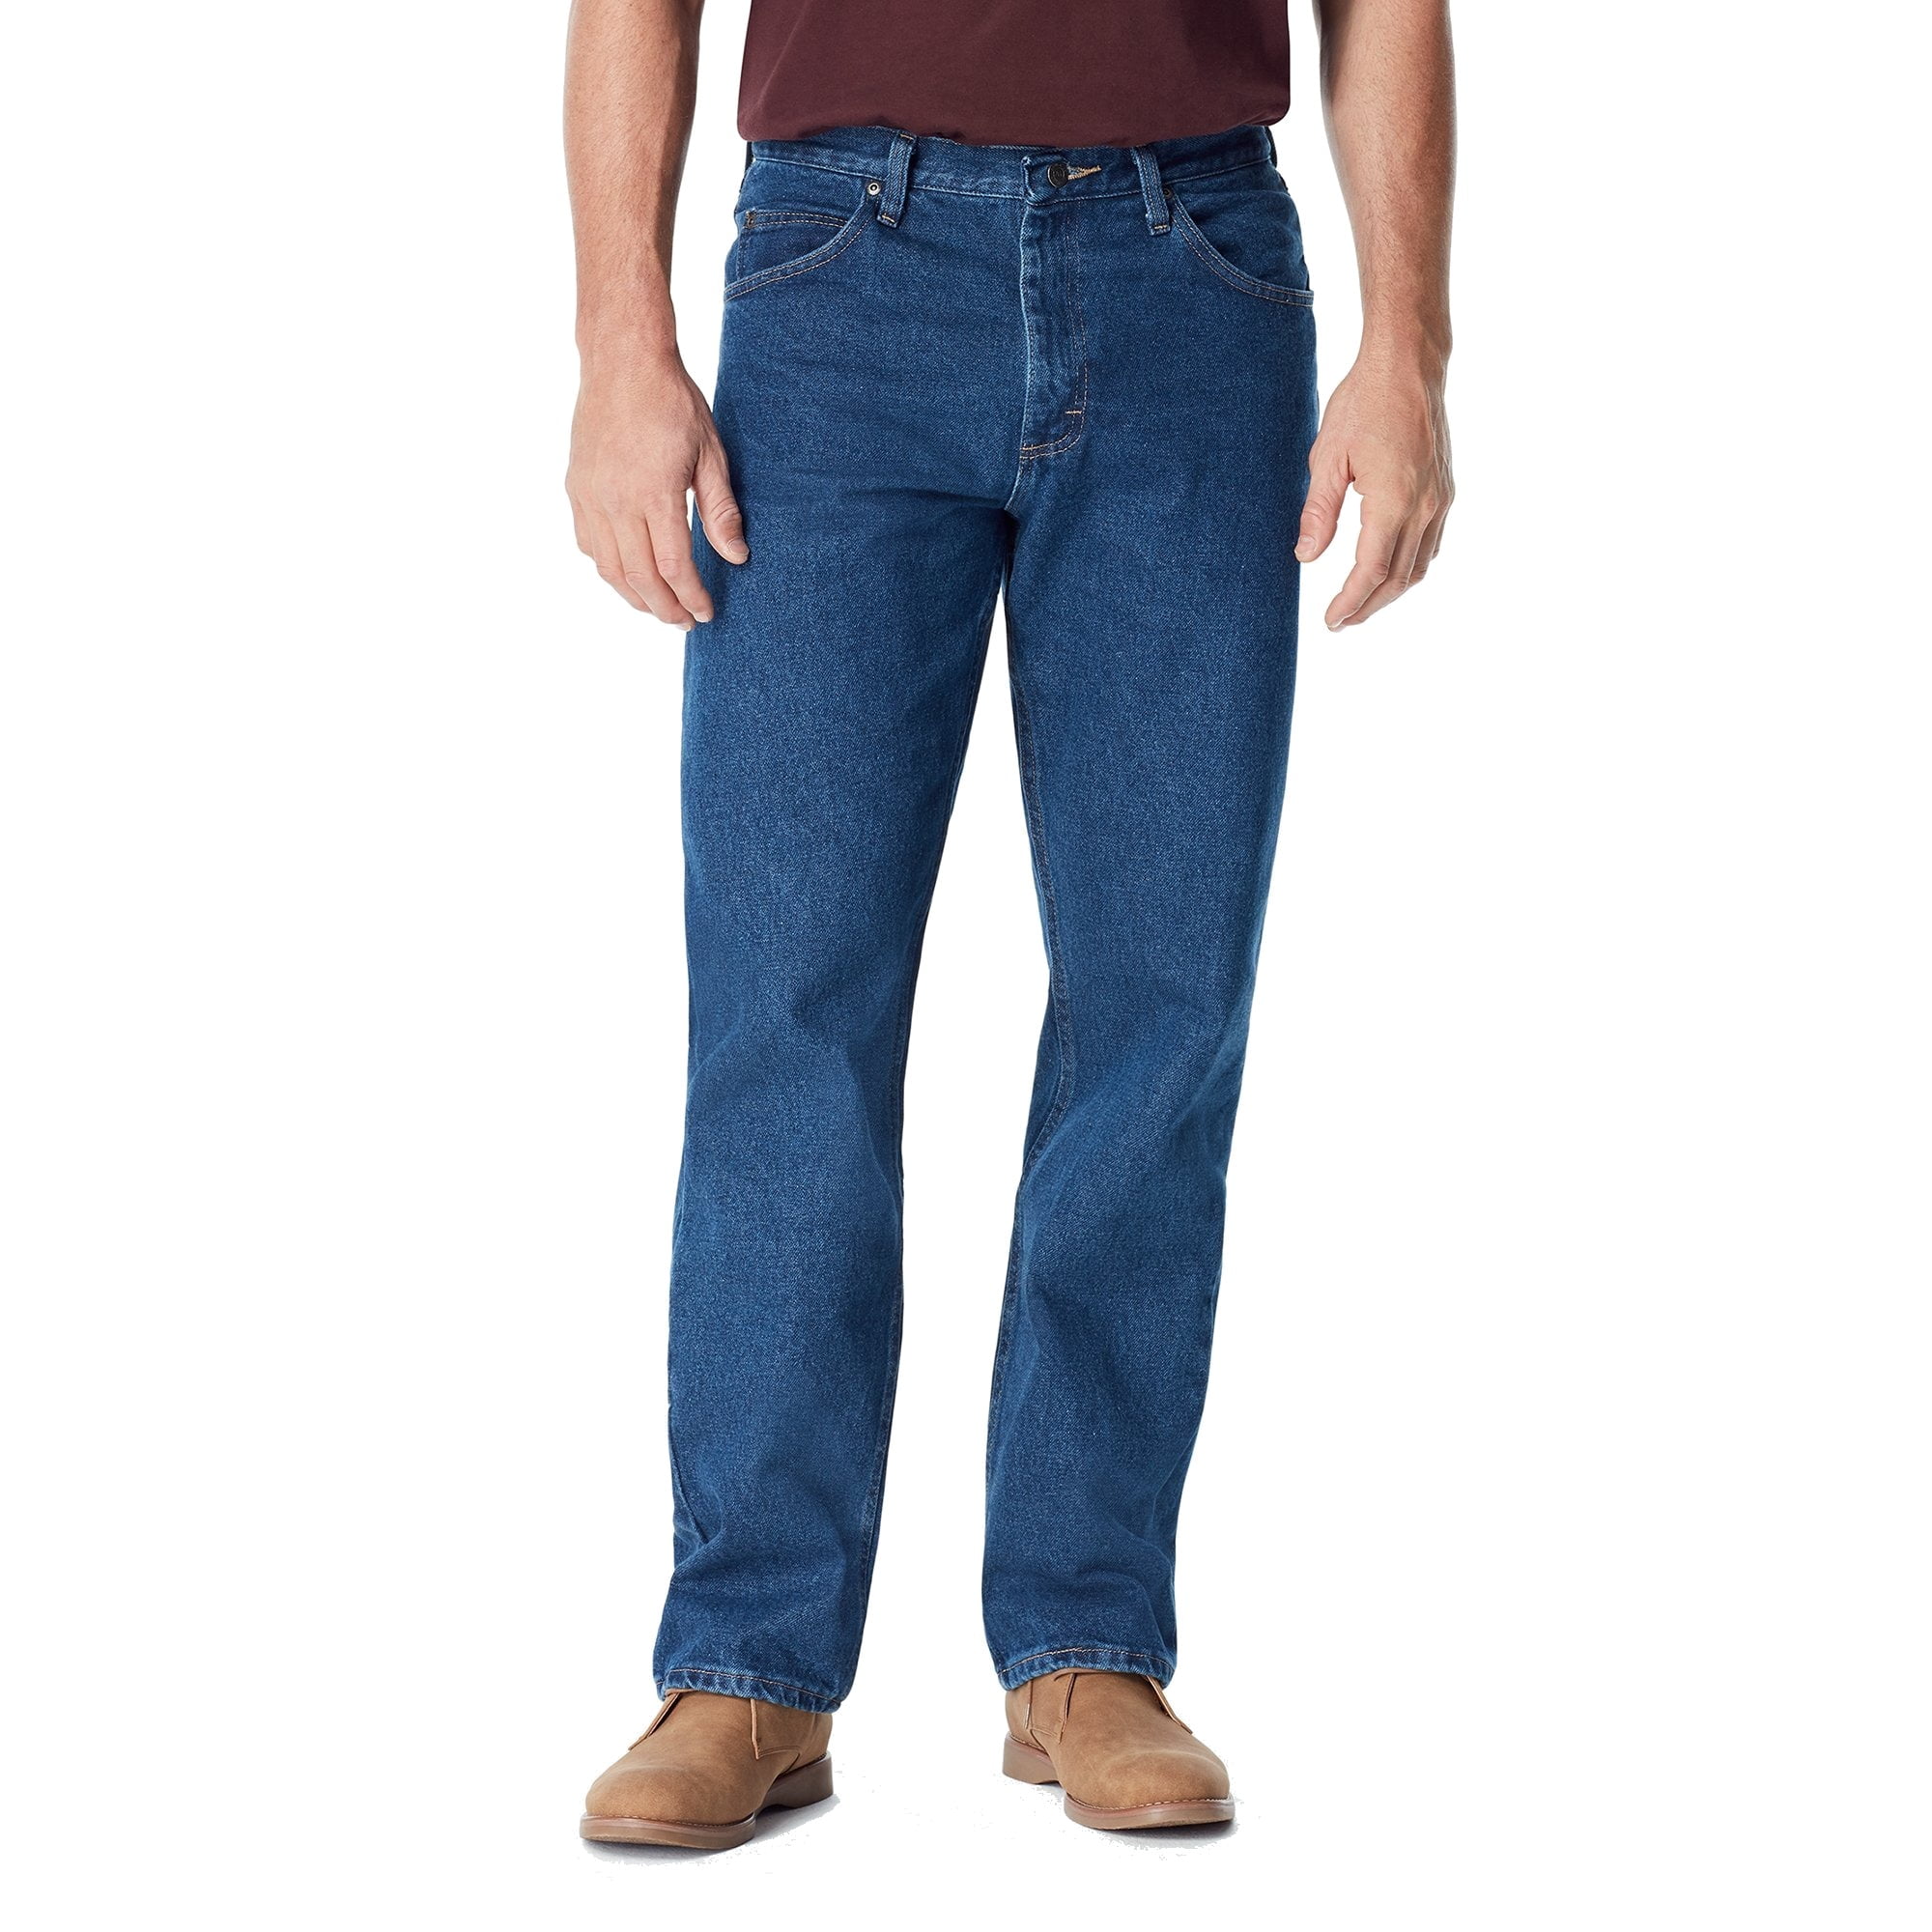 Wrangler Deep Mens 46X30 Mid-Rise Relaxed Fit Jeans - Walmart.com